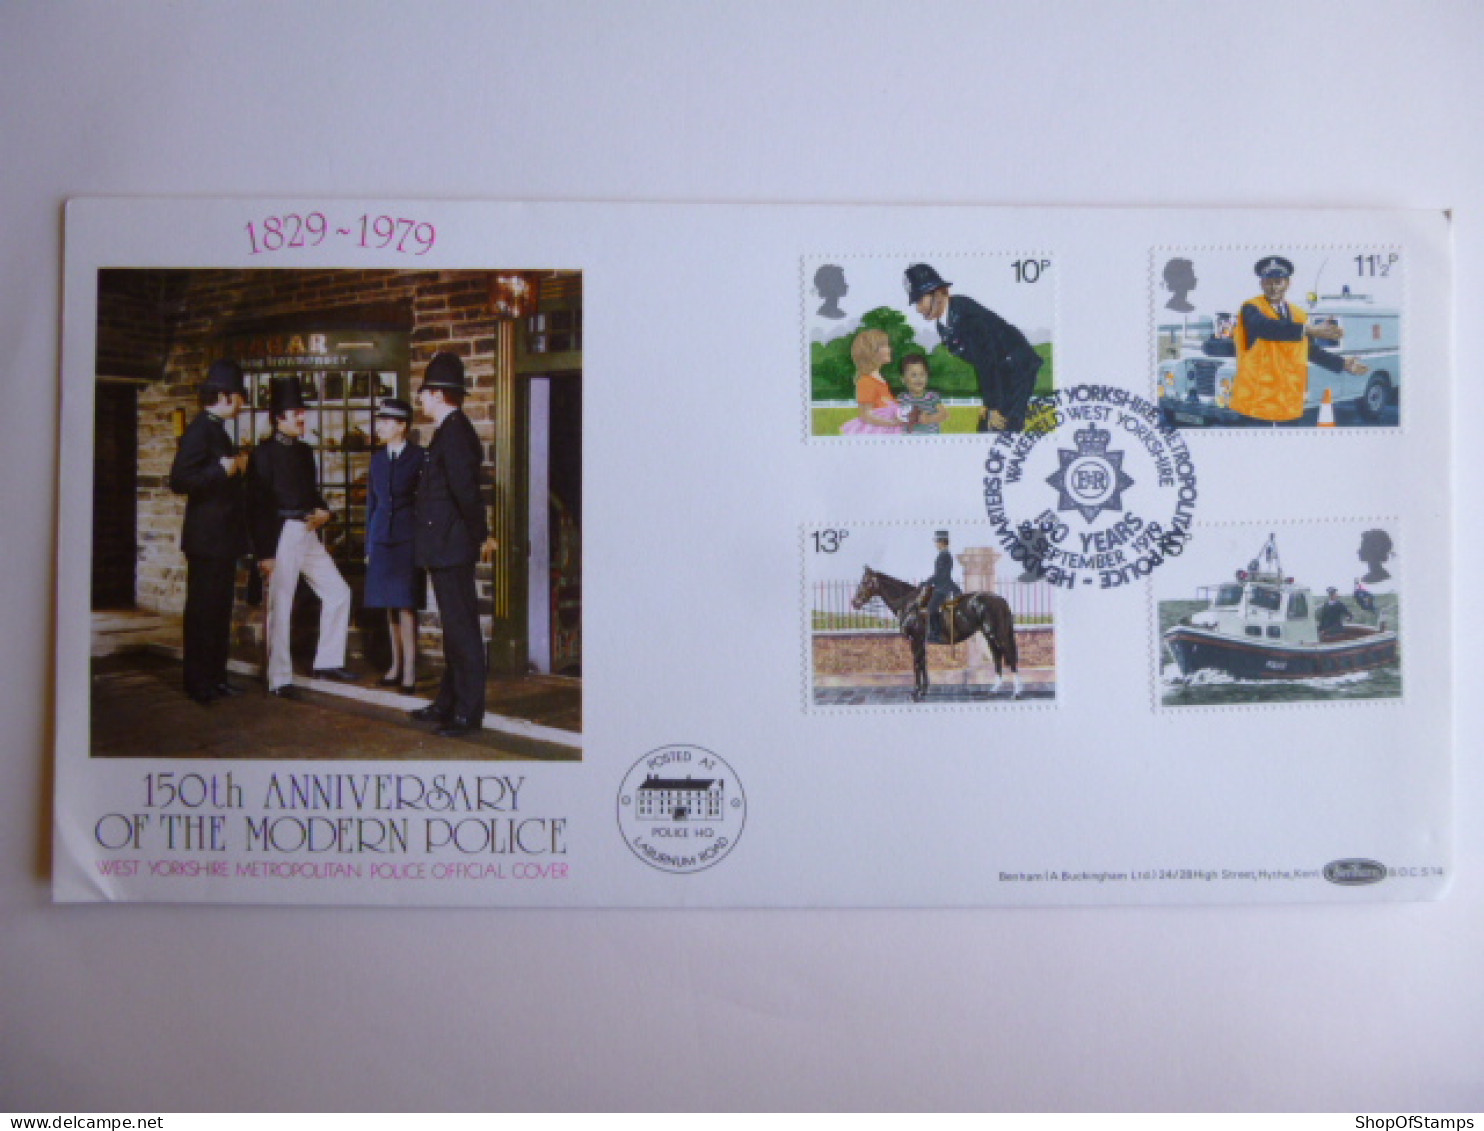 GREAT BRITAIN SG 1100-03 METROPOLITAN POLICE   FDC NEW SCOTLANDYARD POSTMARK POSTED AT POLICE HQ - Unclassified